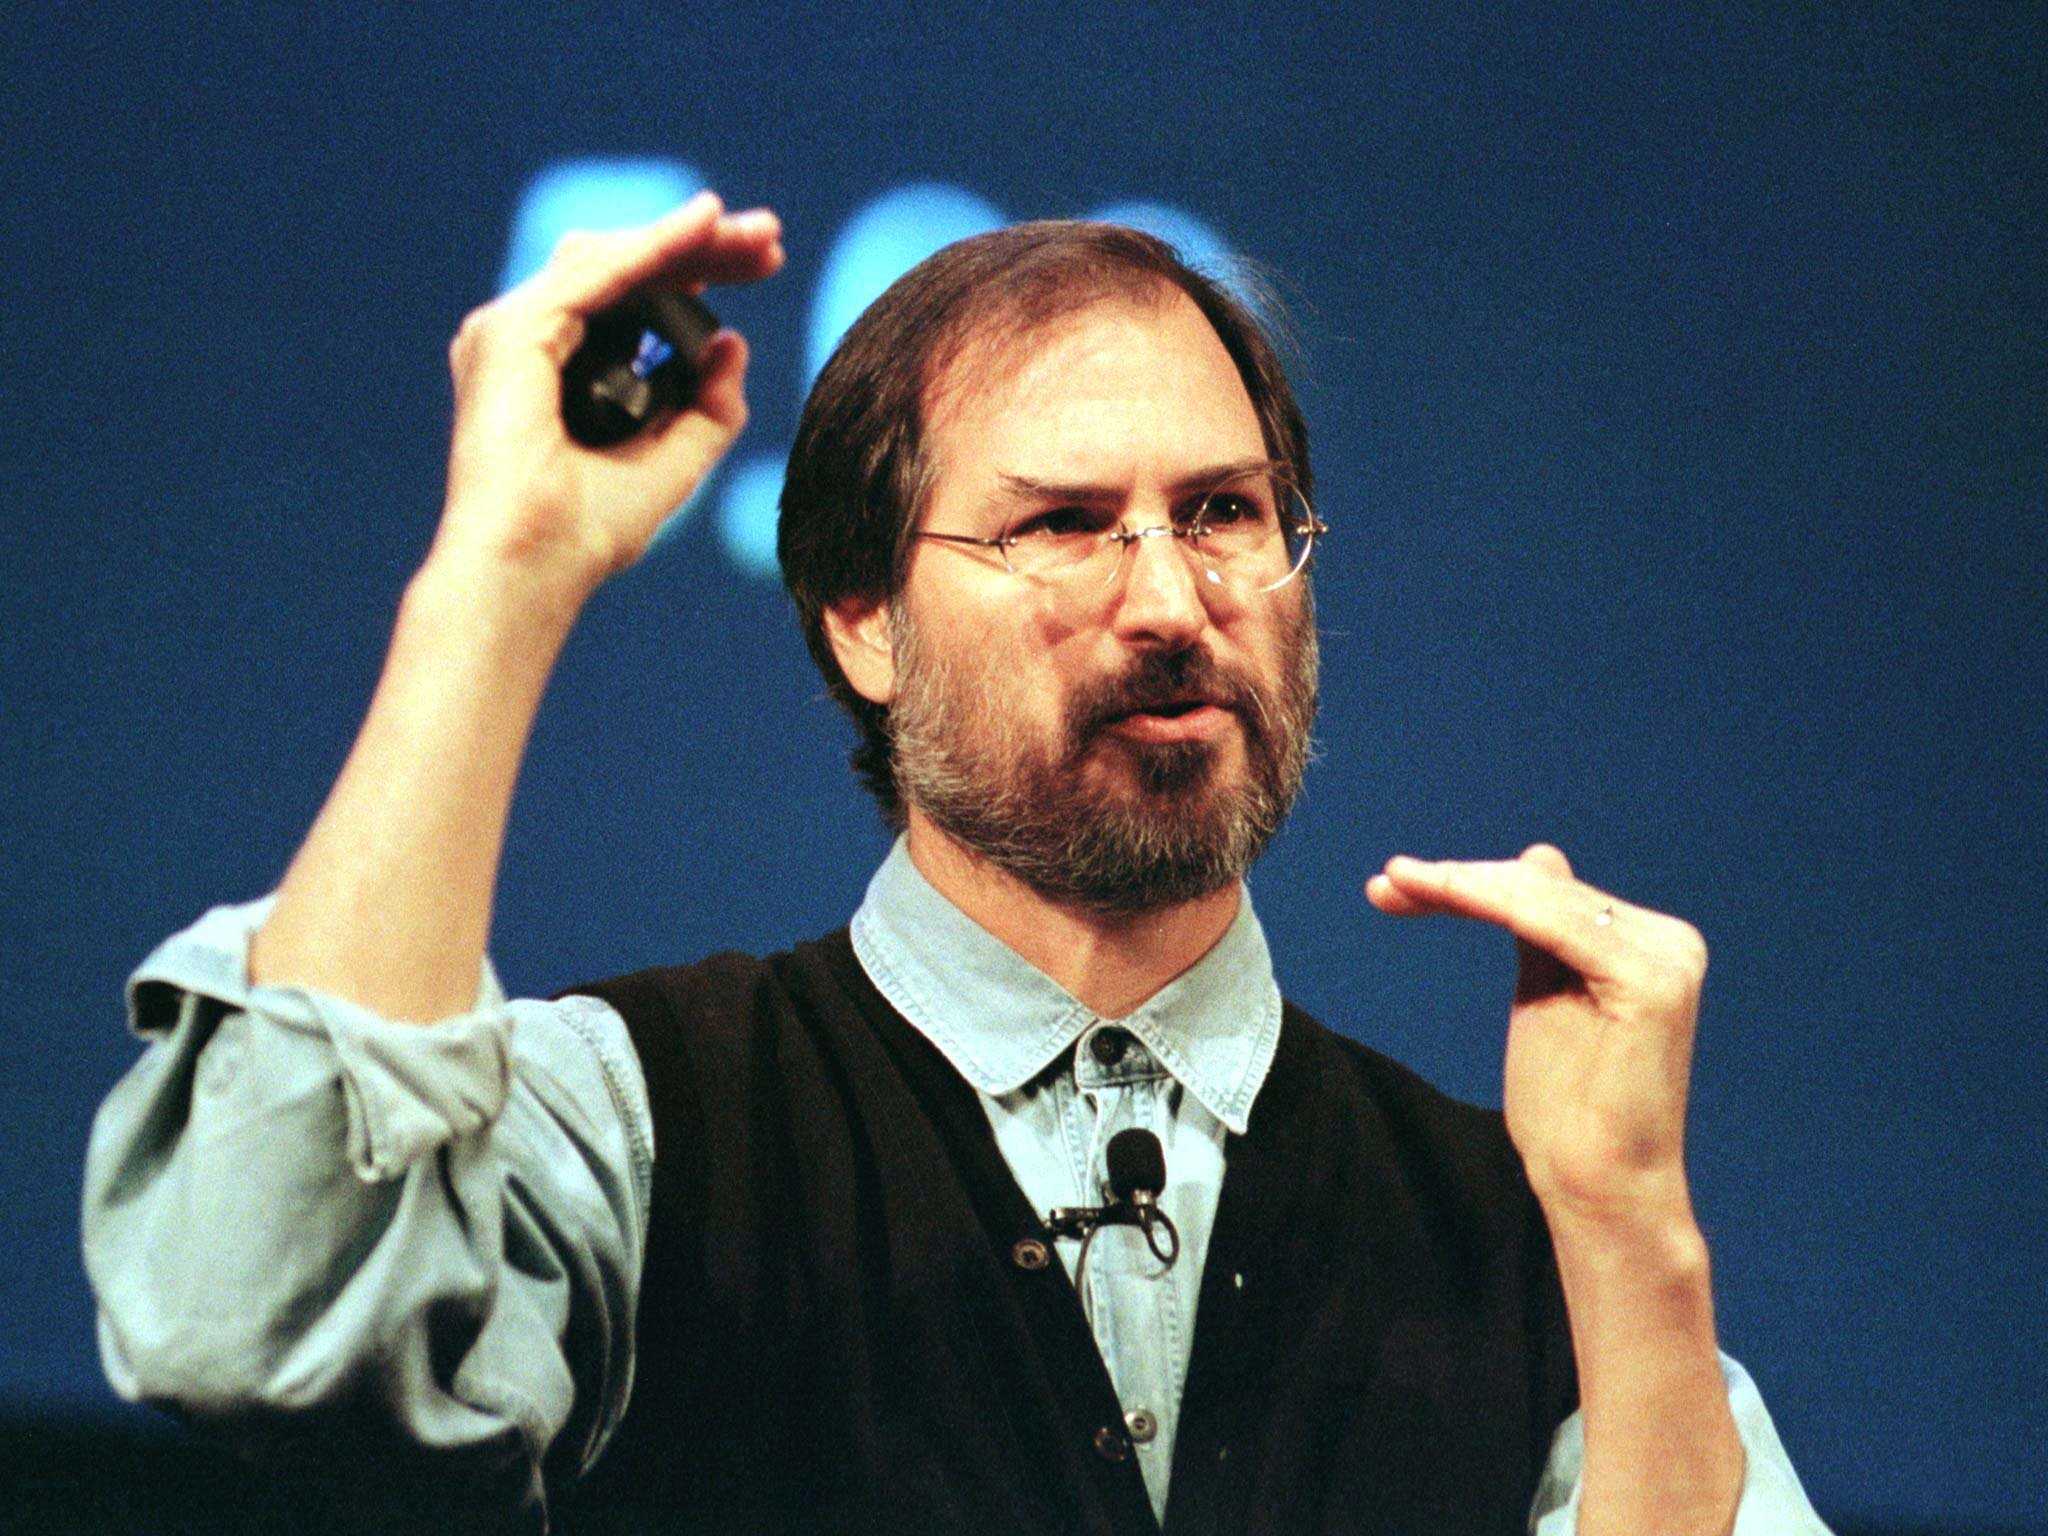 steve-jobs-predicted-the-future-of-e-commerce-back-in-1996-and-got-it-exactly-right.jpg